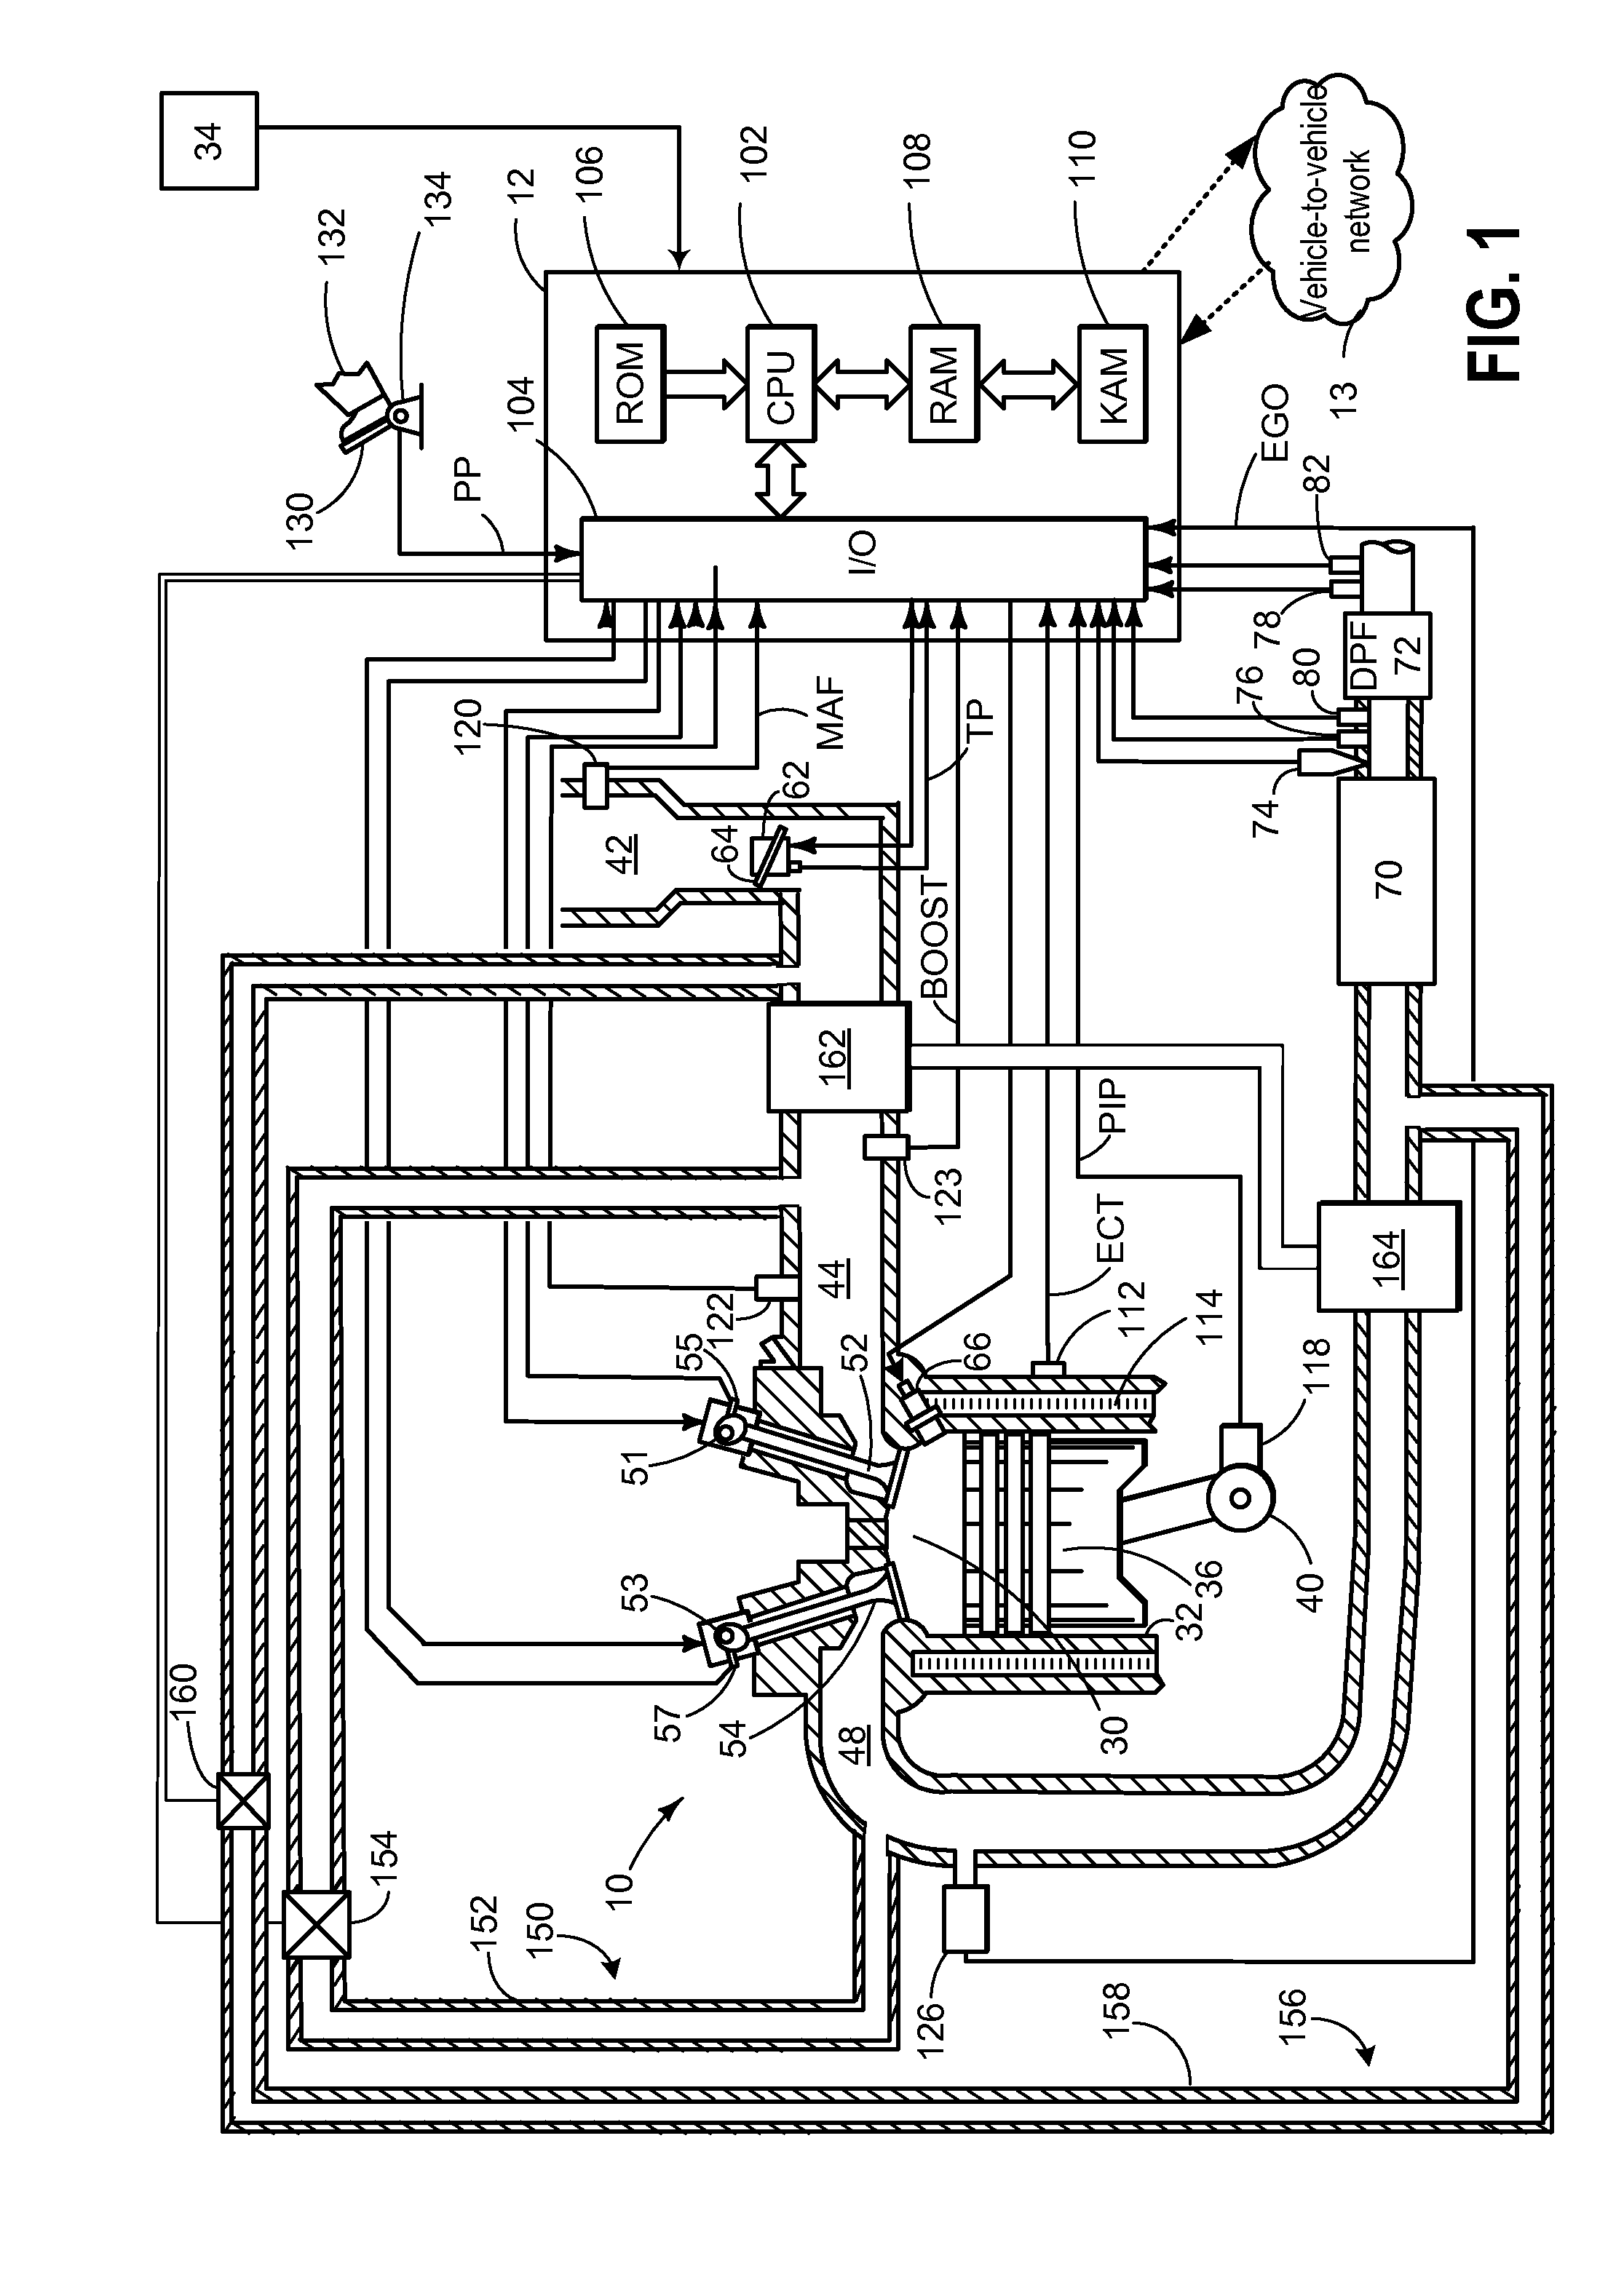 Systems and methods for opportunistic diesel particulate filter regeneration